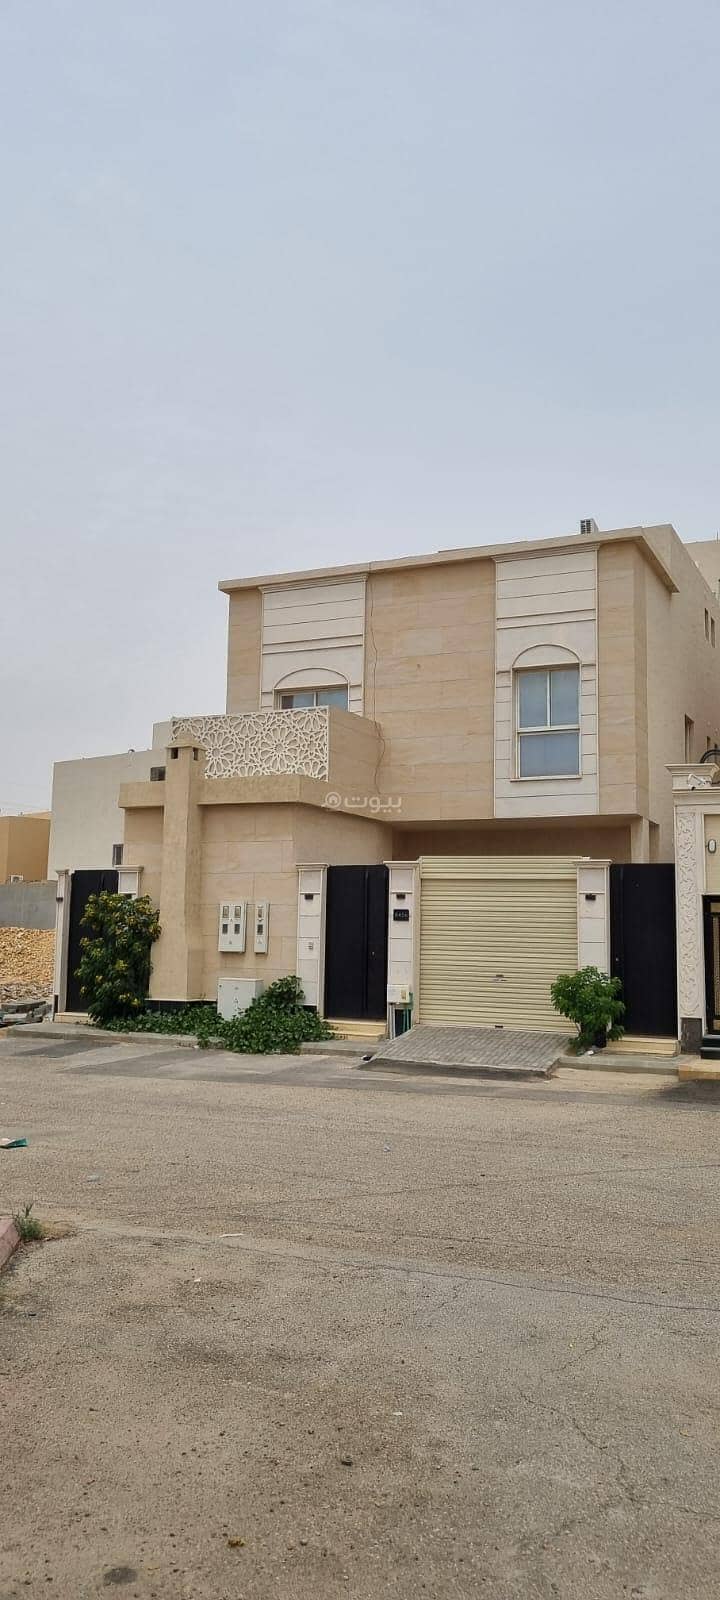 3 Bedroom Apartment For Rent in Hatin, Riyadh